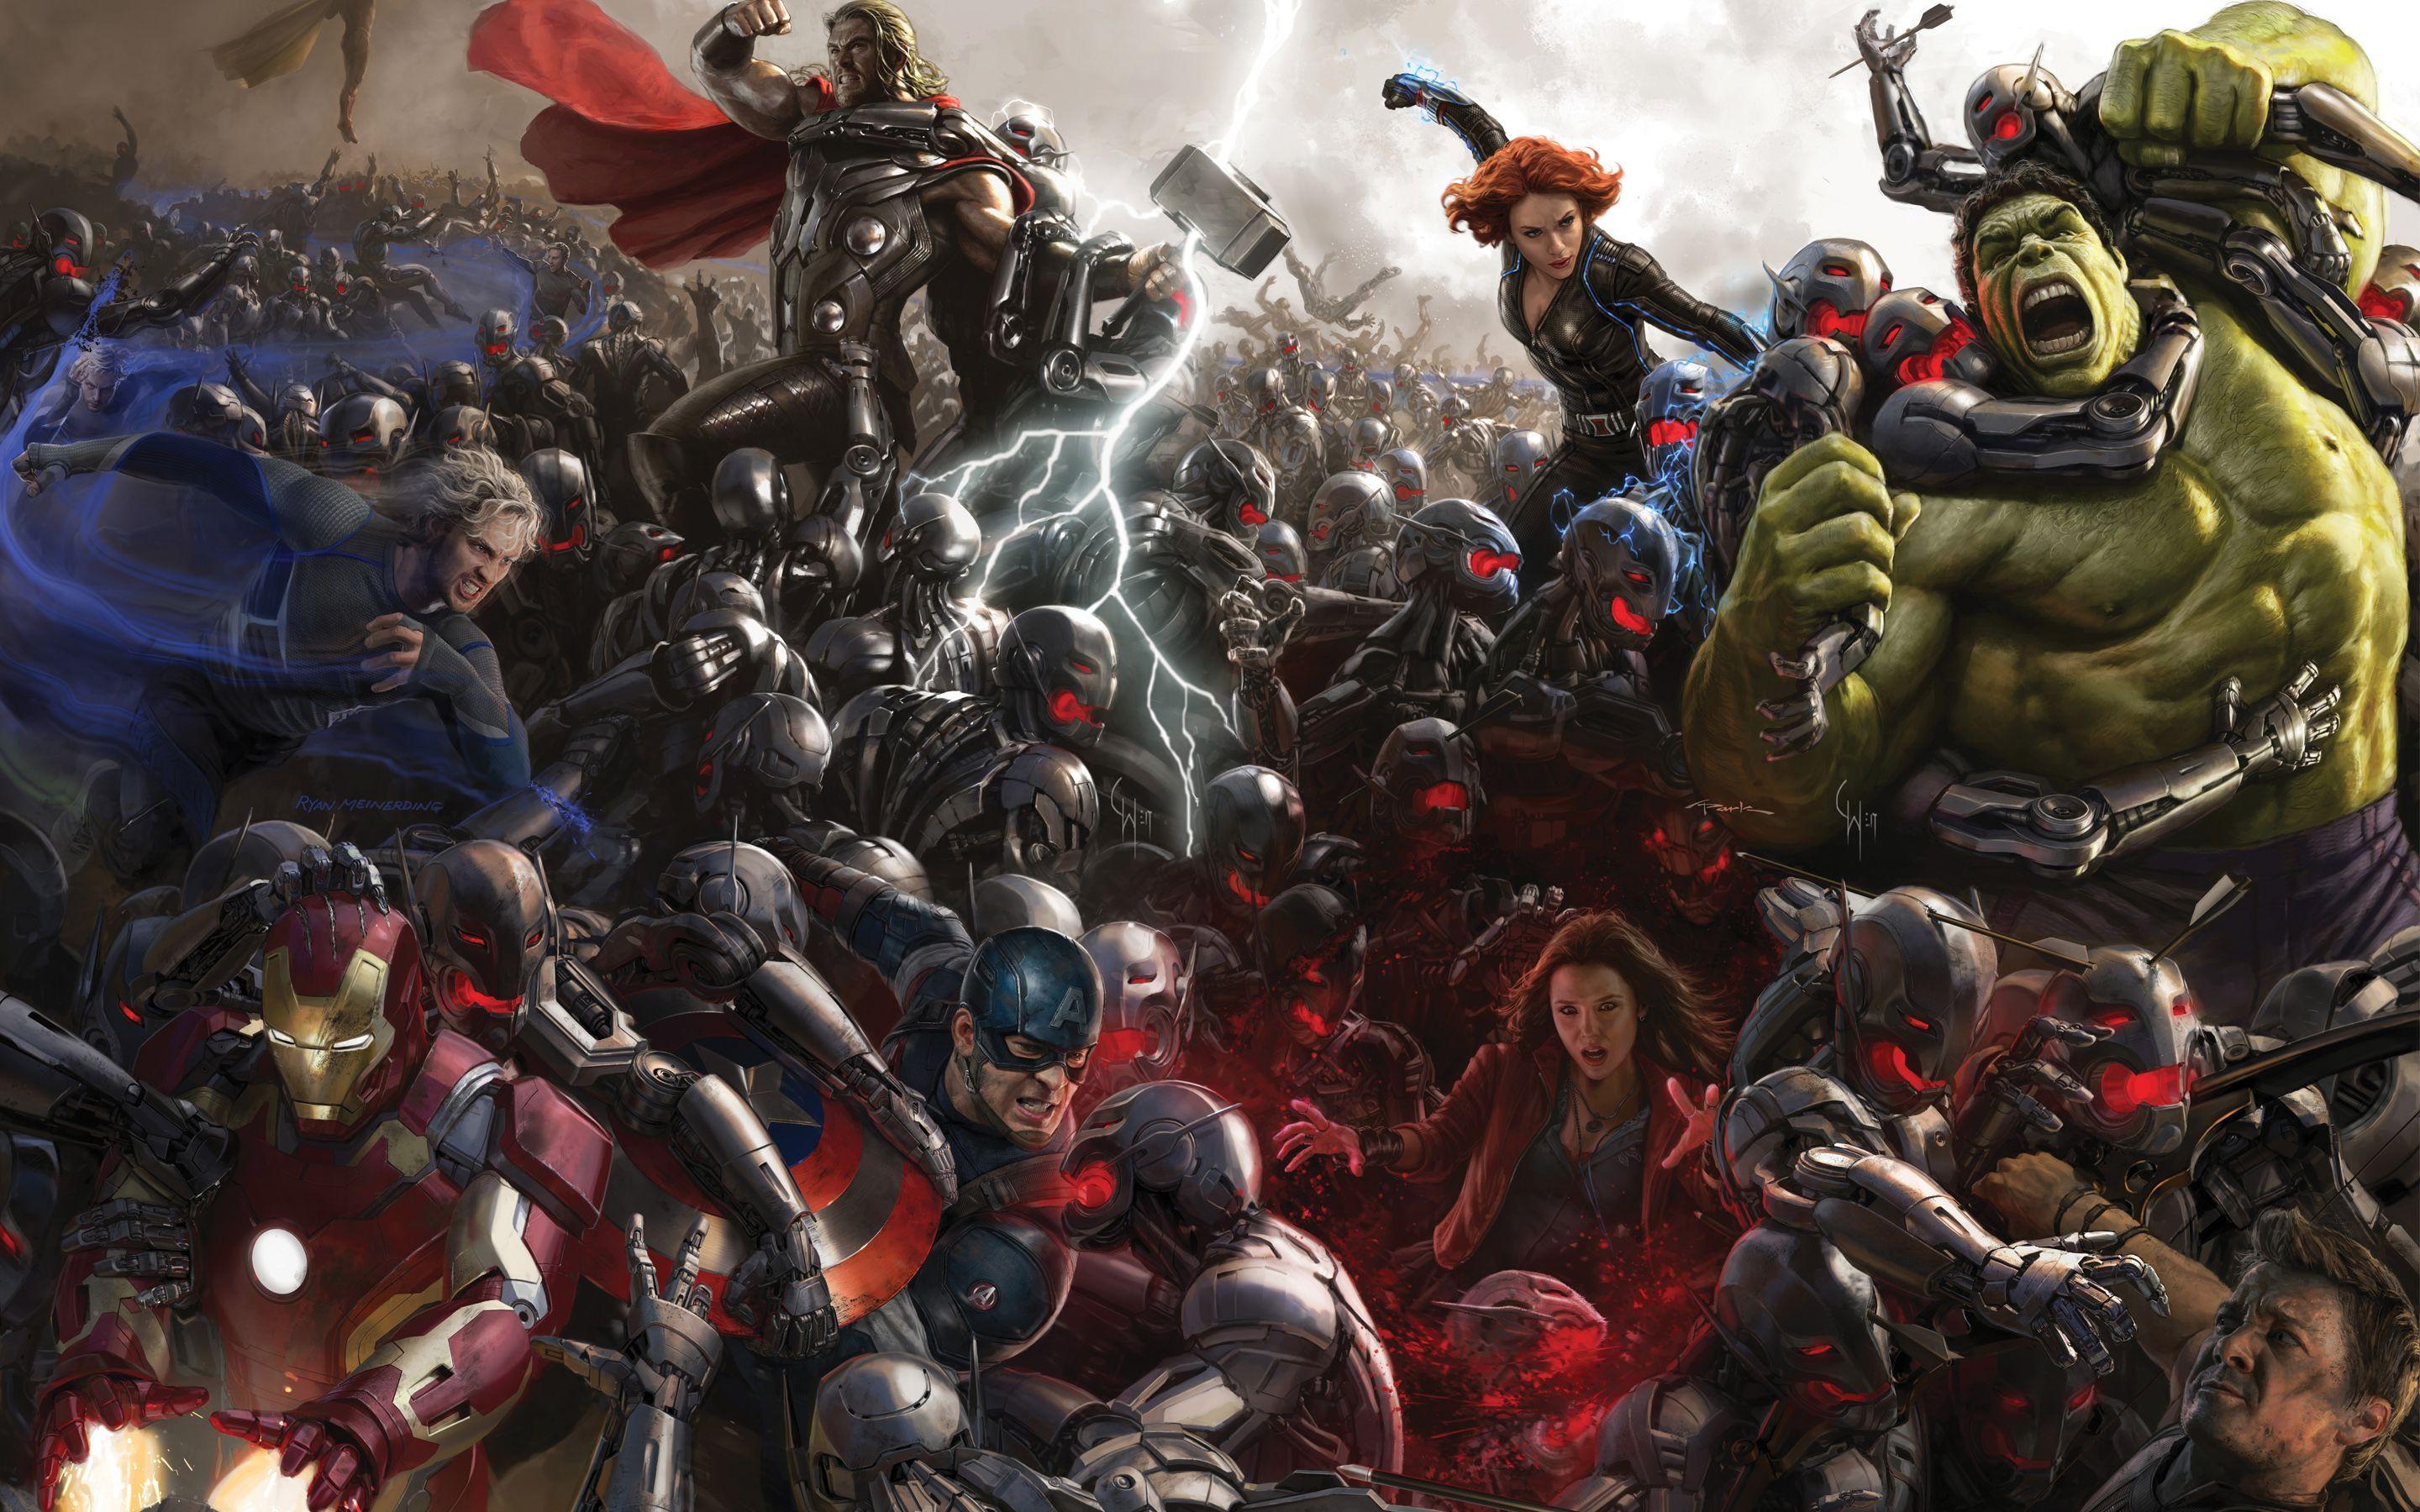 The Avengers Age Of Ultron Wallpaper High Quality